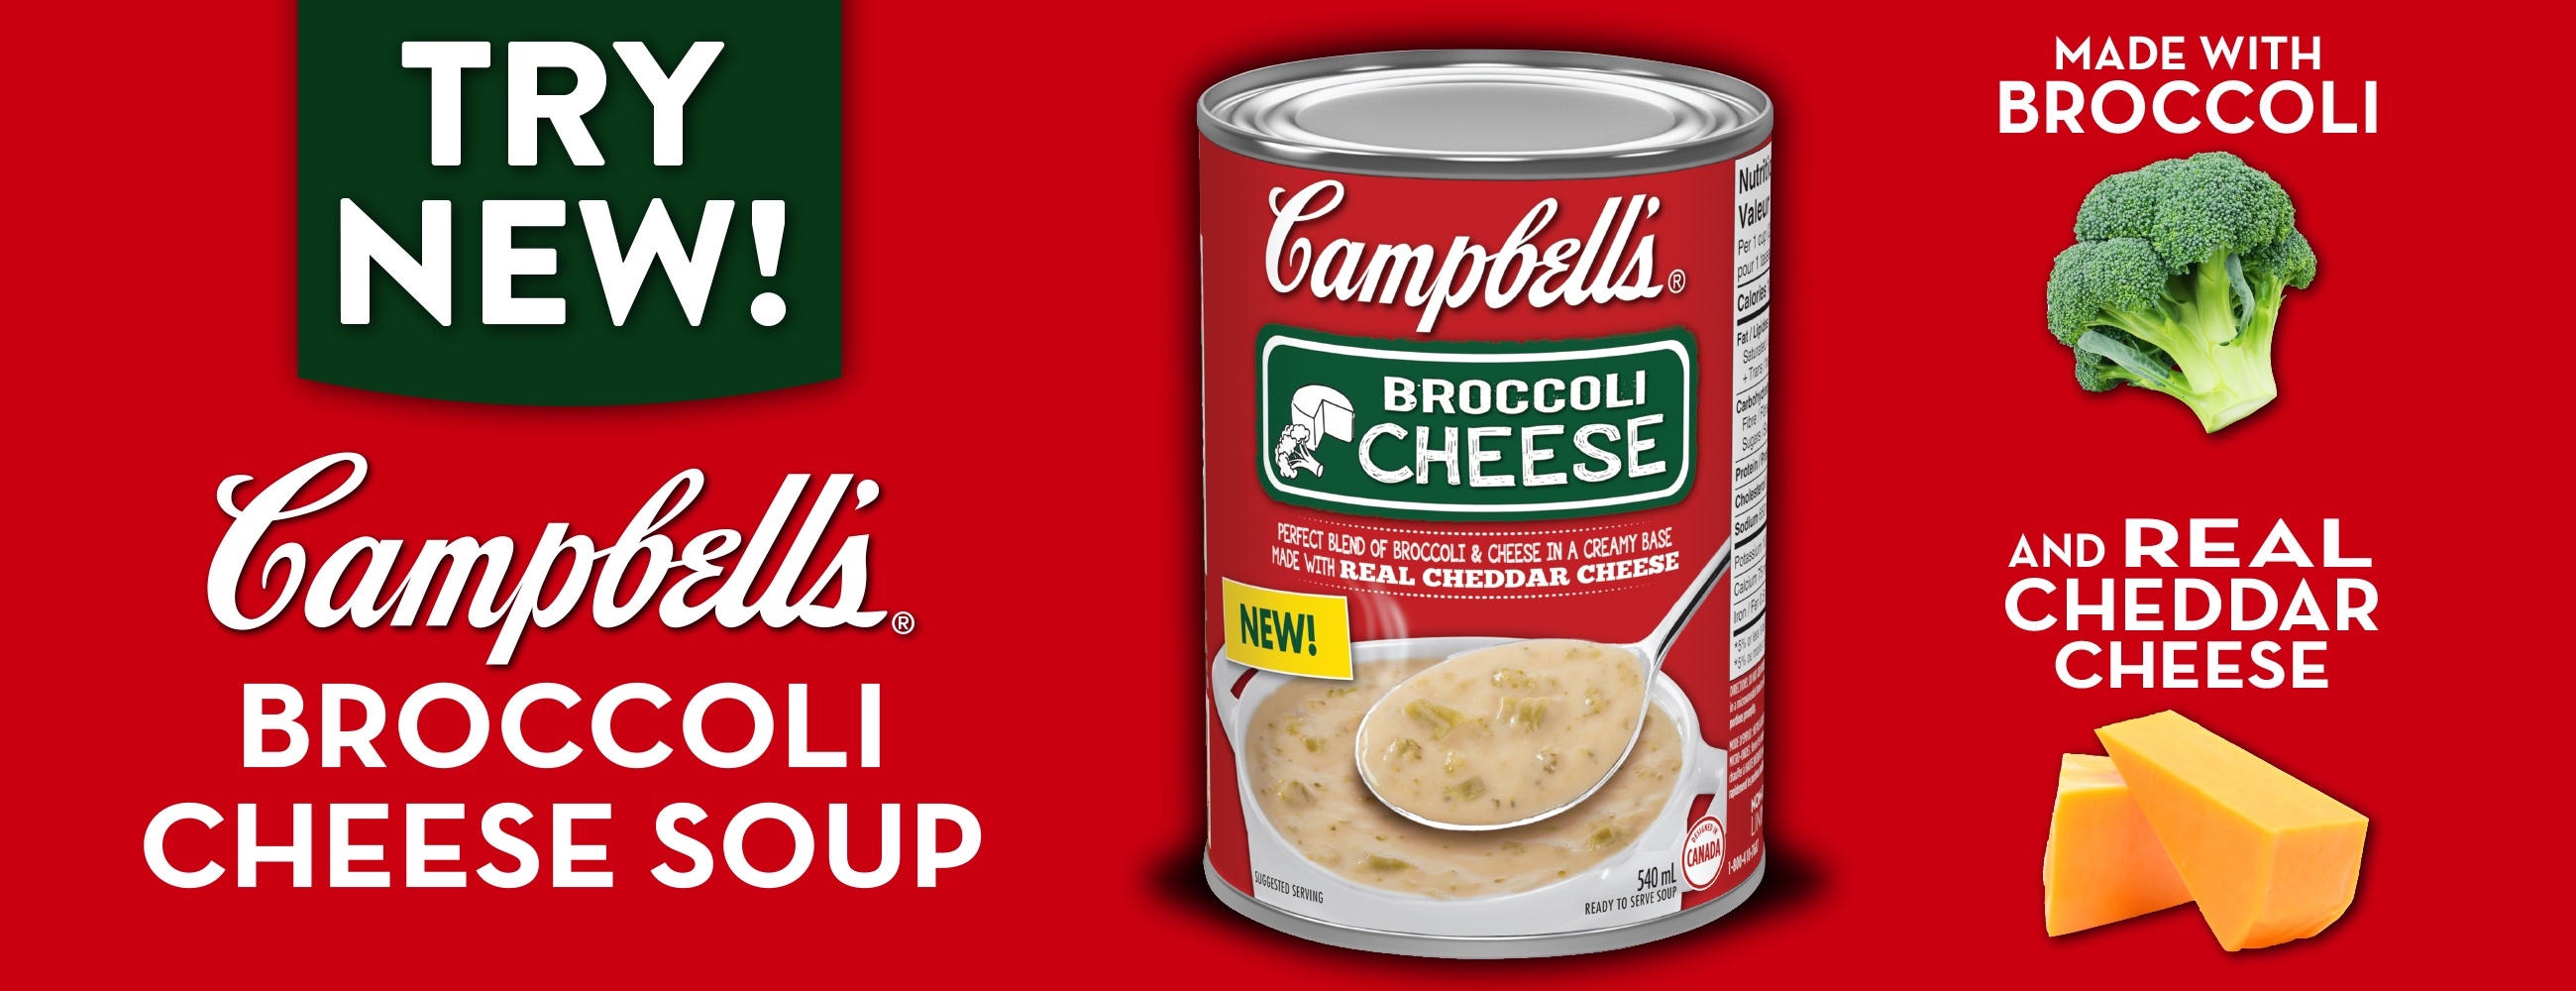 Try New! Campbell's Broccoli Cheese Soup. Made with Broccoli and real Cheddar Cheese.